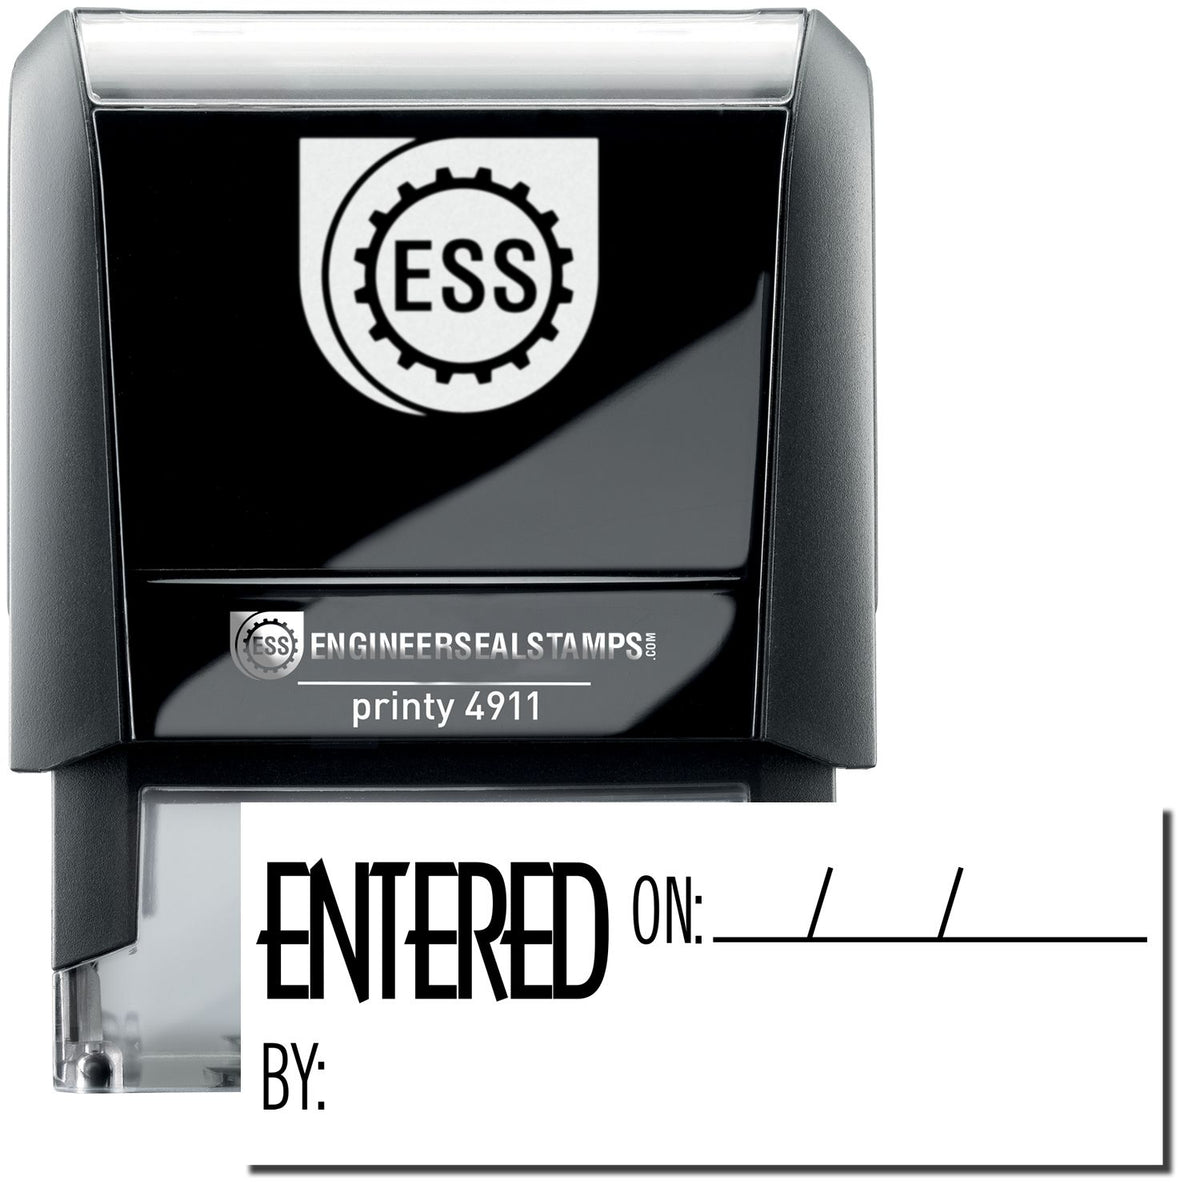 A self-inking stamp with a stamped image showing how the text &quot;ENTERED ON:&quot; with space for mentioning a date is given and under it, the text &quot;BY:&quot; with space for mentioning the name of the person who did the work is given is displayed after stamping.